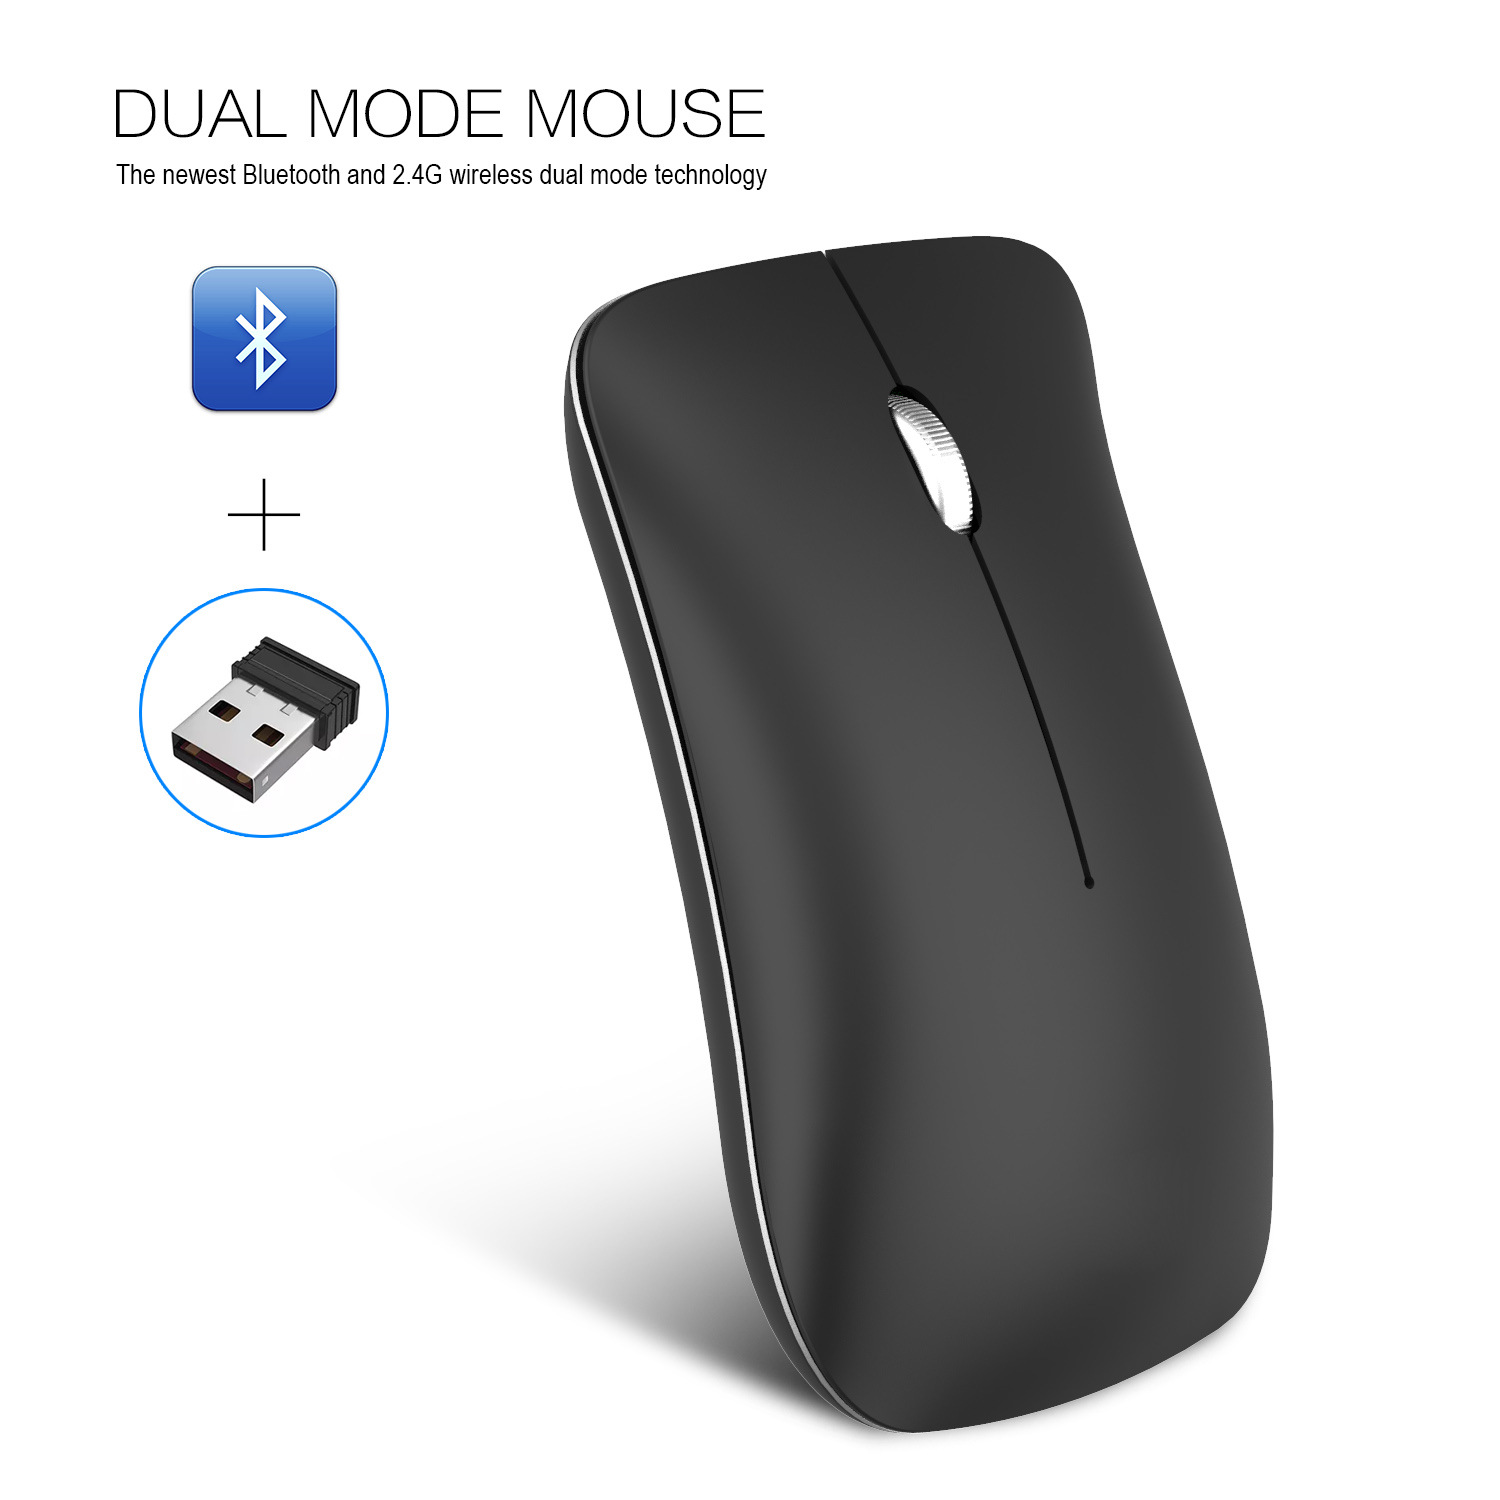 Wireless Bluetooth Mouse Rechargeable 2.4G USB Optical Vertical Ergonomic Dual Mode Mute Mouse black